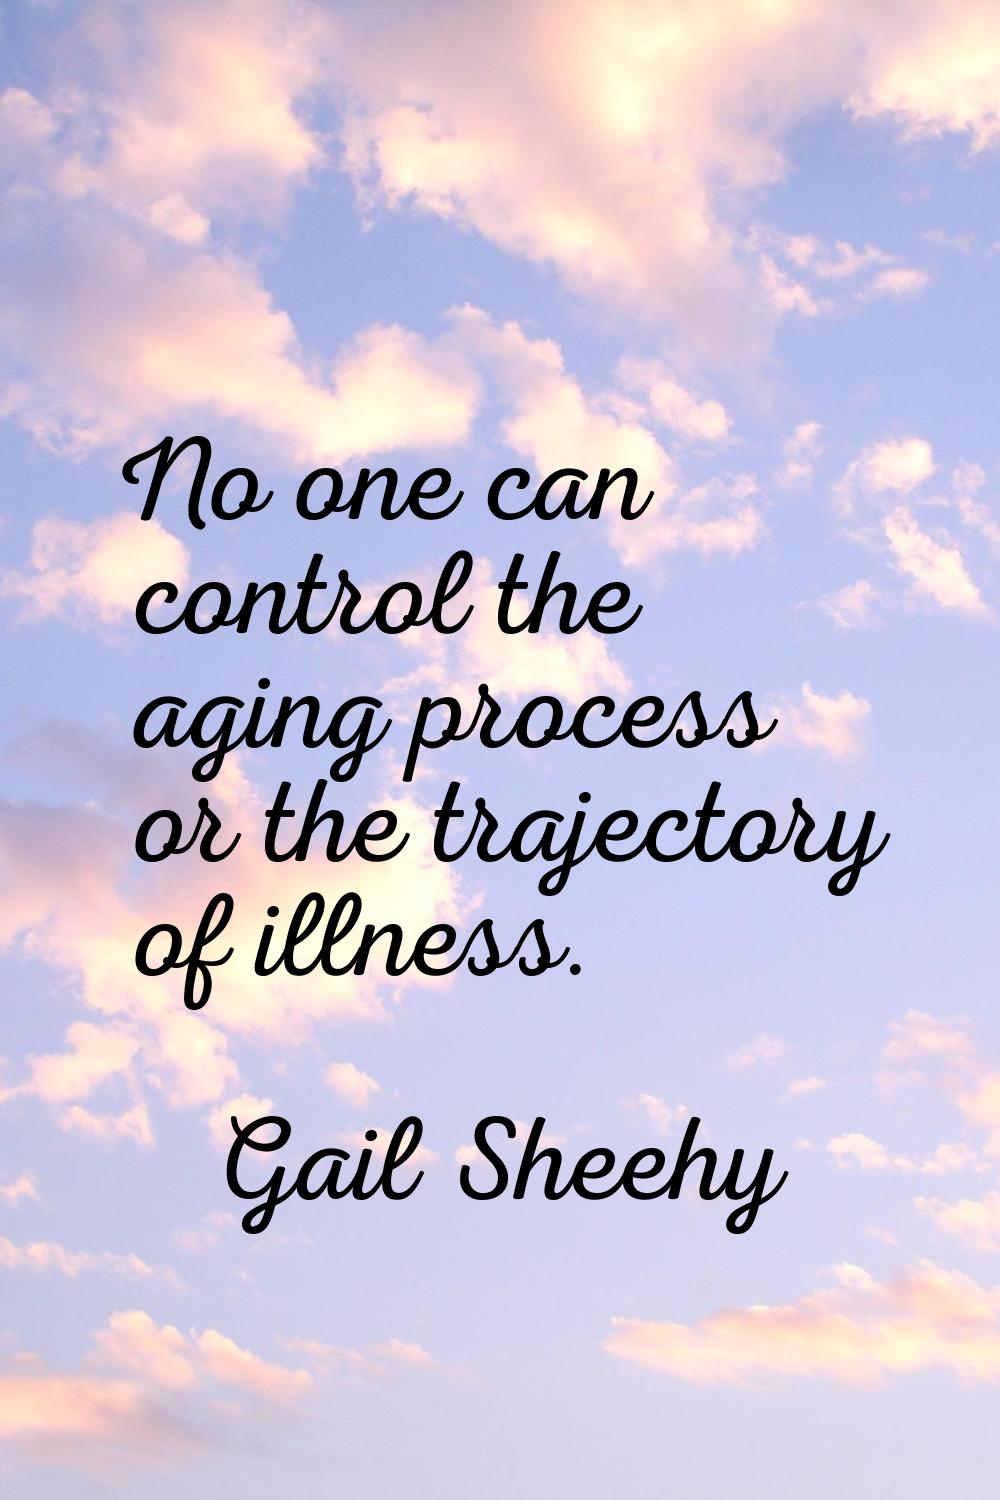 No one can control the aging process or the trajectory of illness.